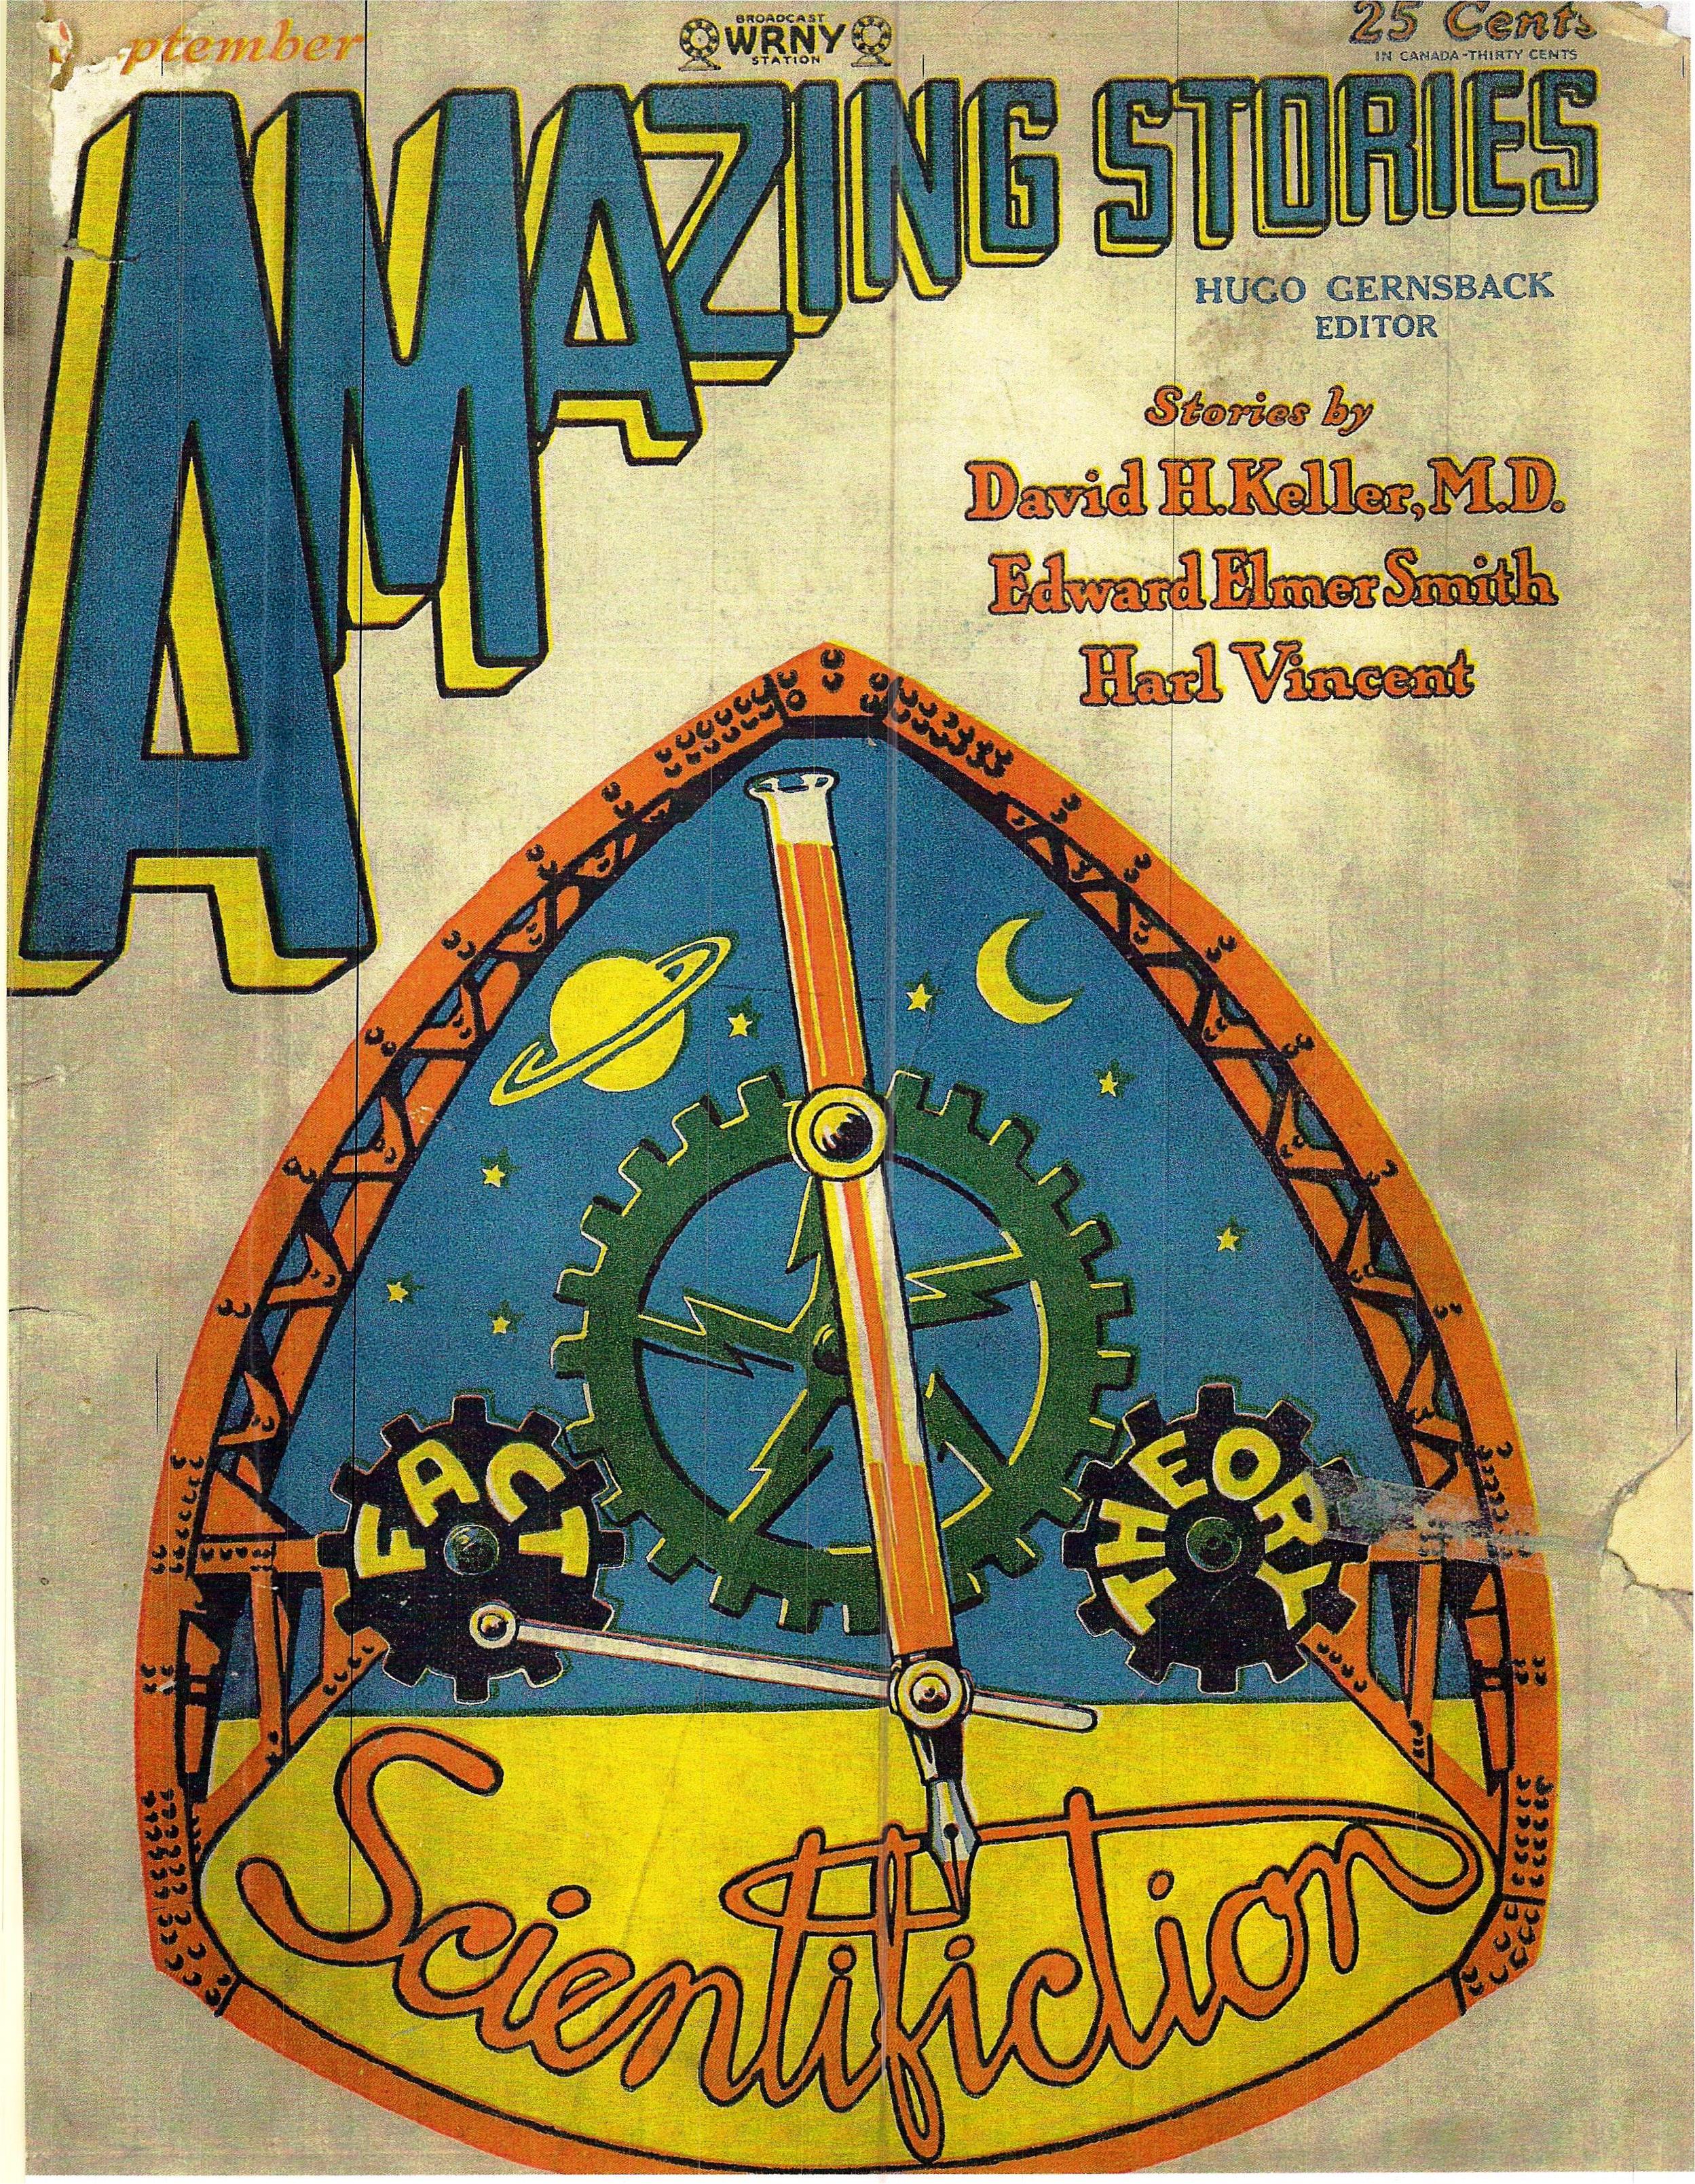 Cover of Amazing Stories, September 1928, featuring a logo with script text reading scientifiction.